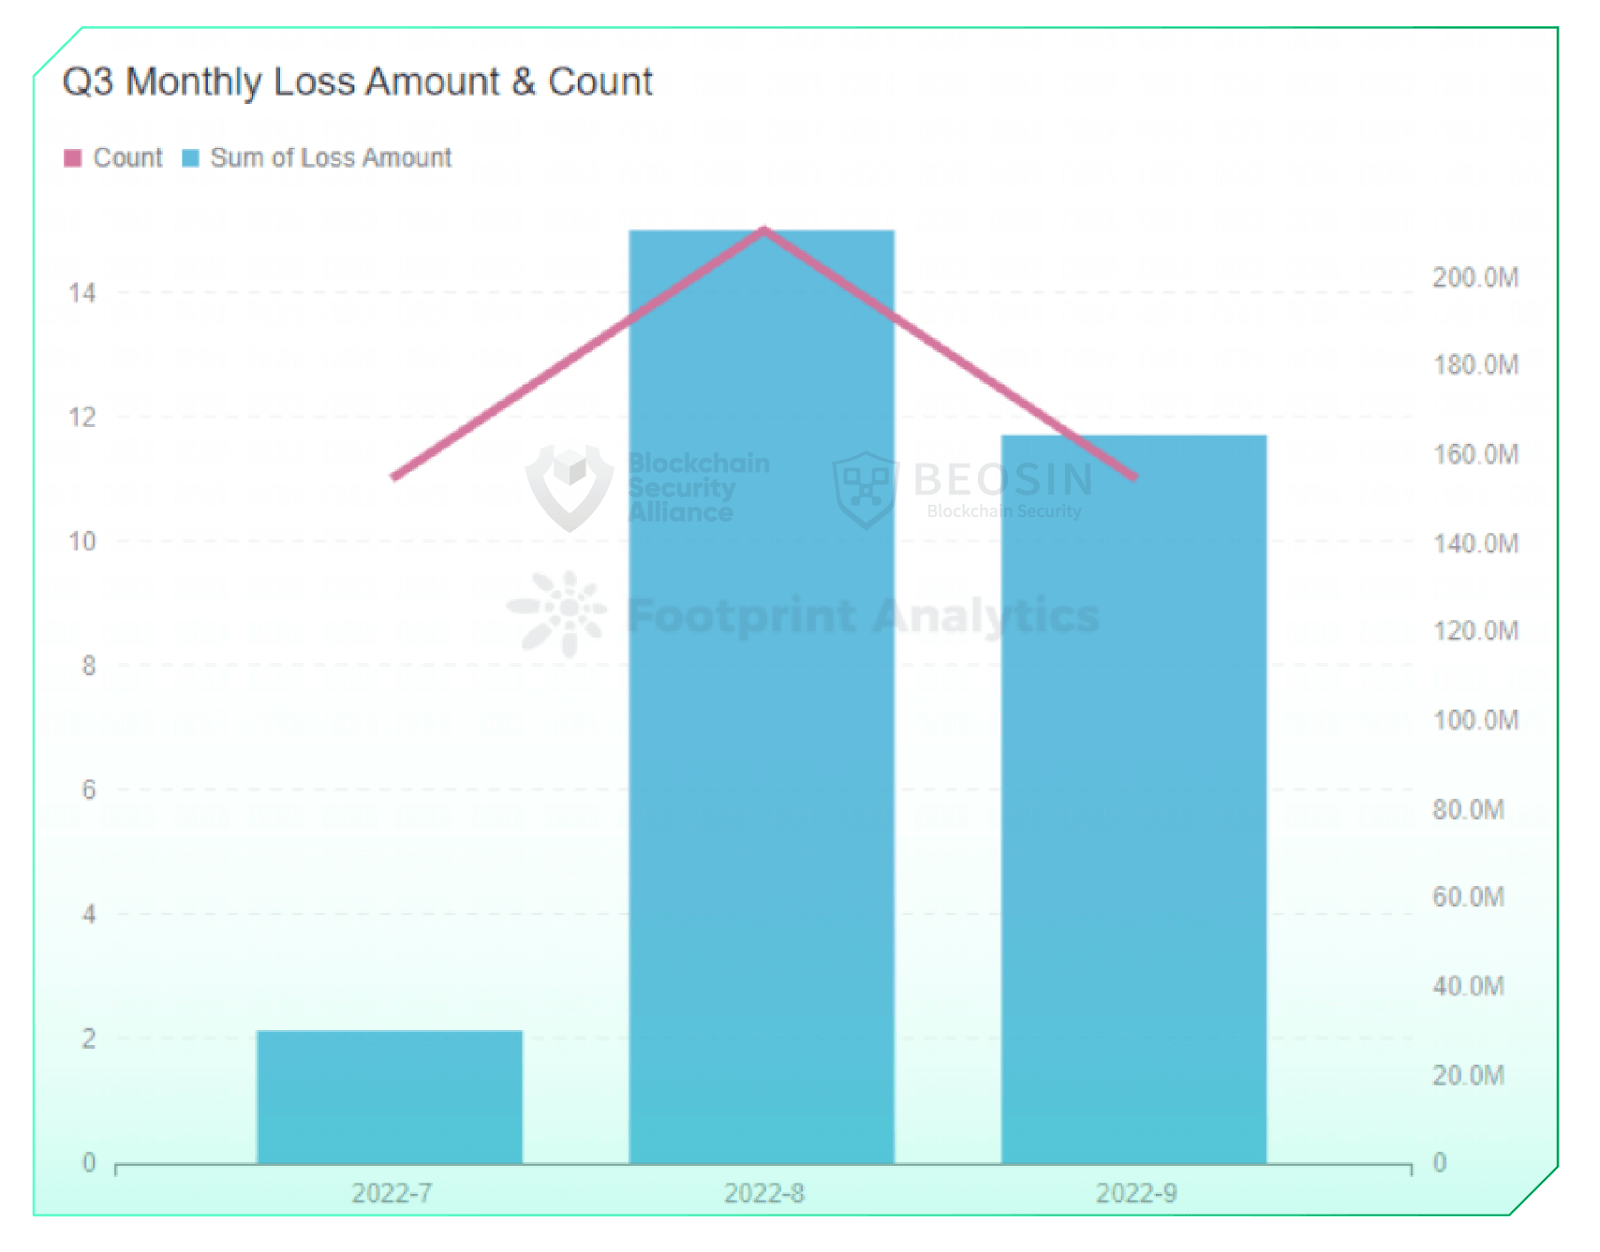 Q3 Monthly Loss Amount and Count